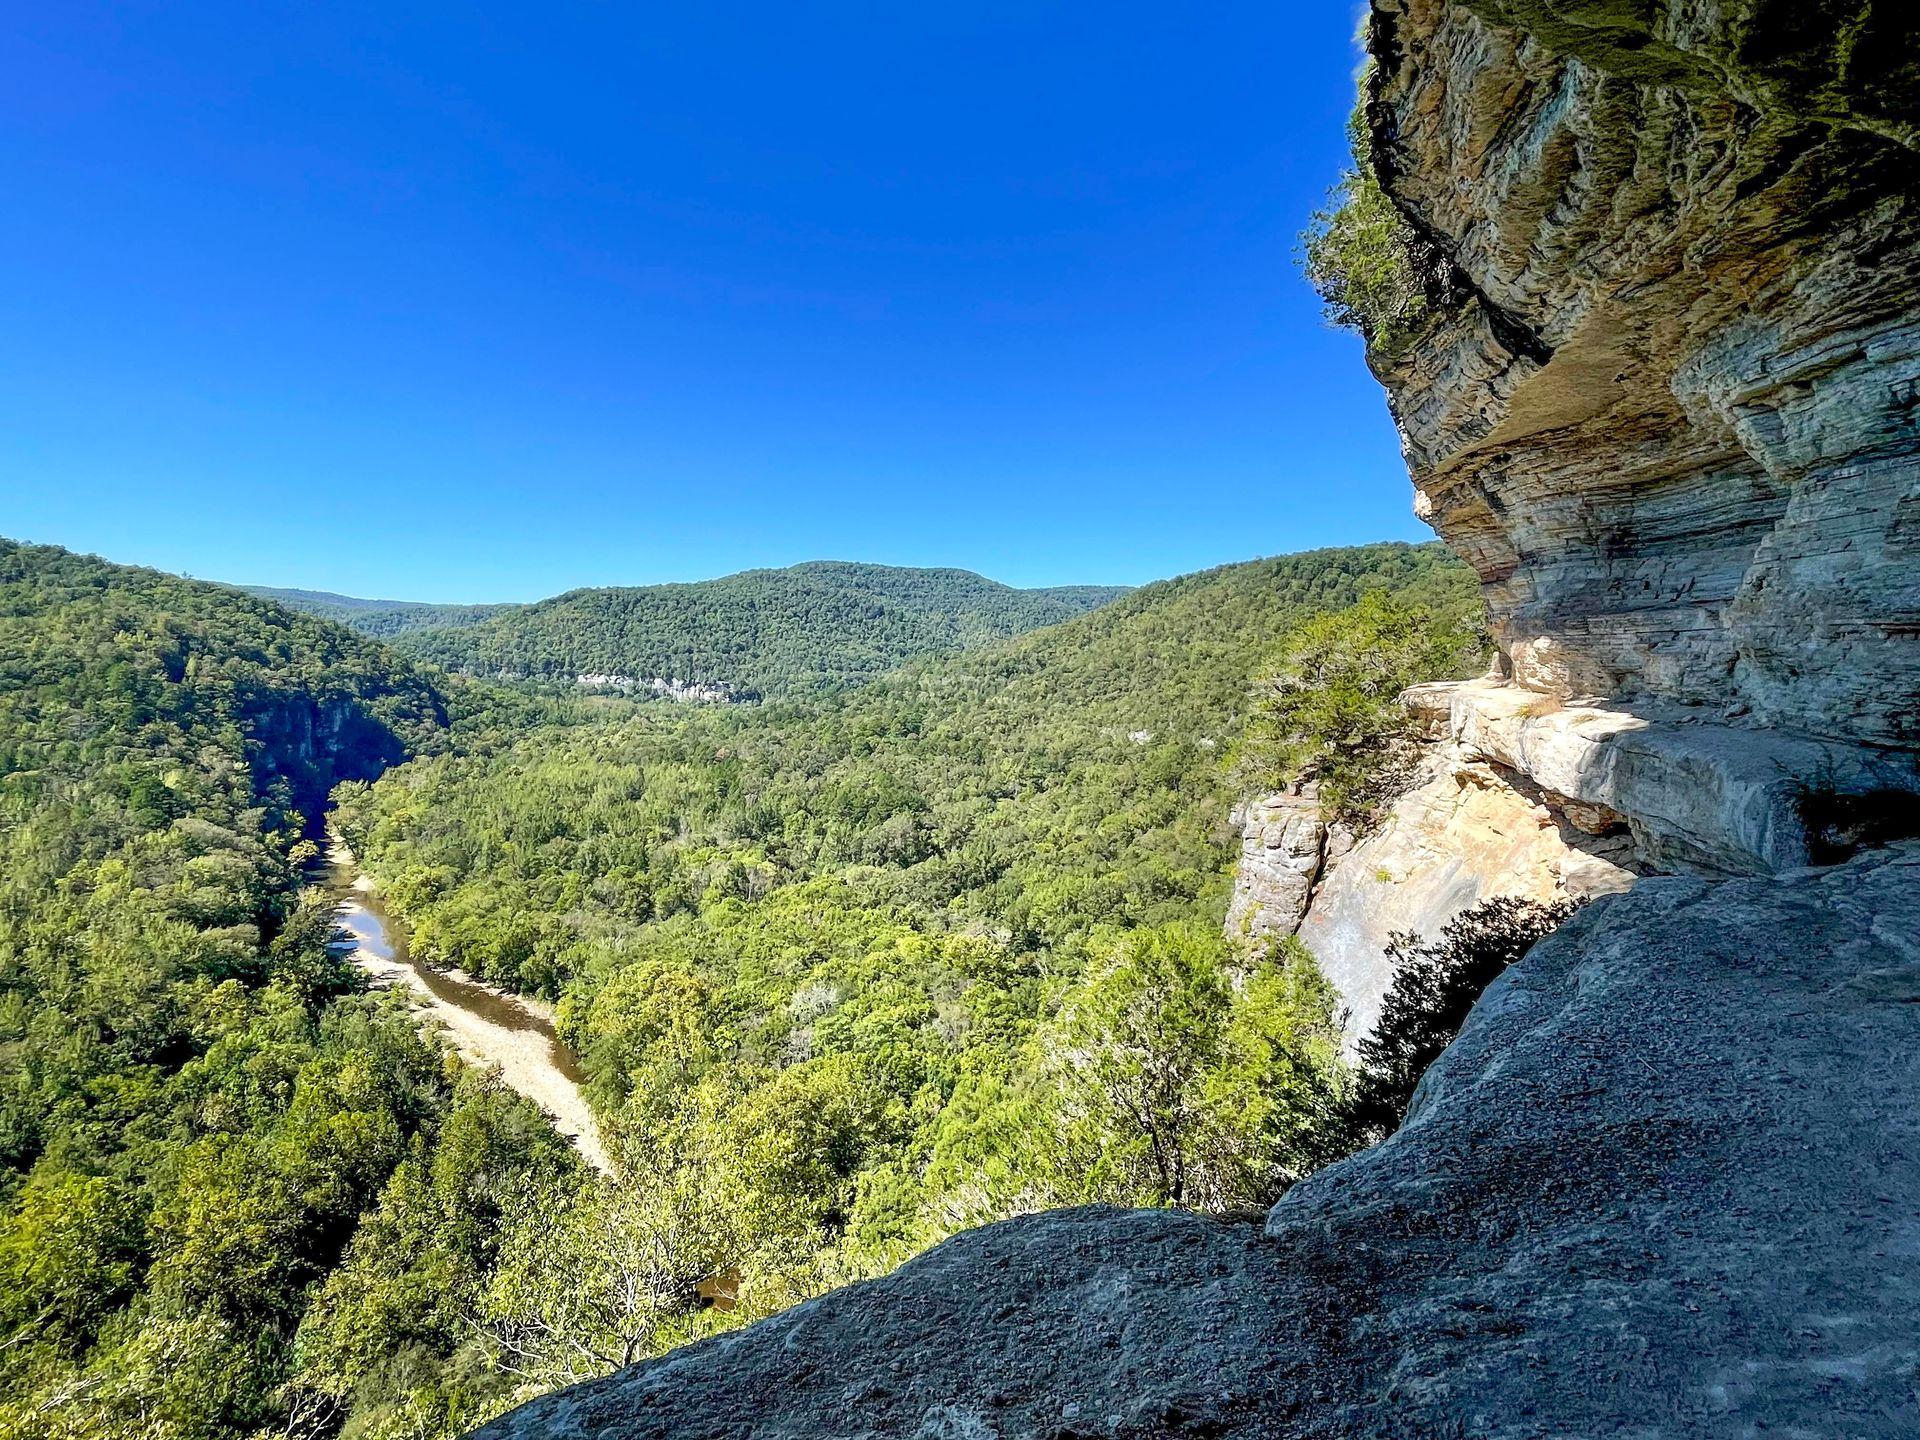 A view of the Buffalo National Park from the Goats Bluff Trail in Arkansas. There is a large cliff face and the river is in the valley down below.